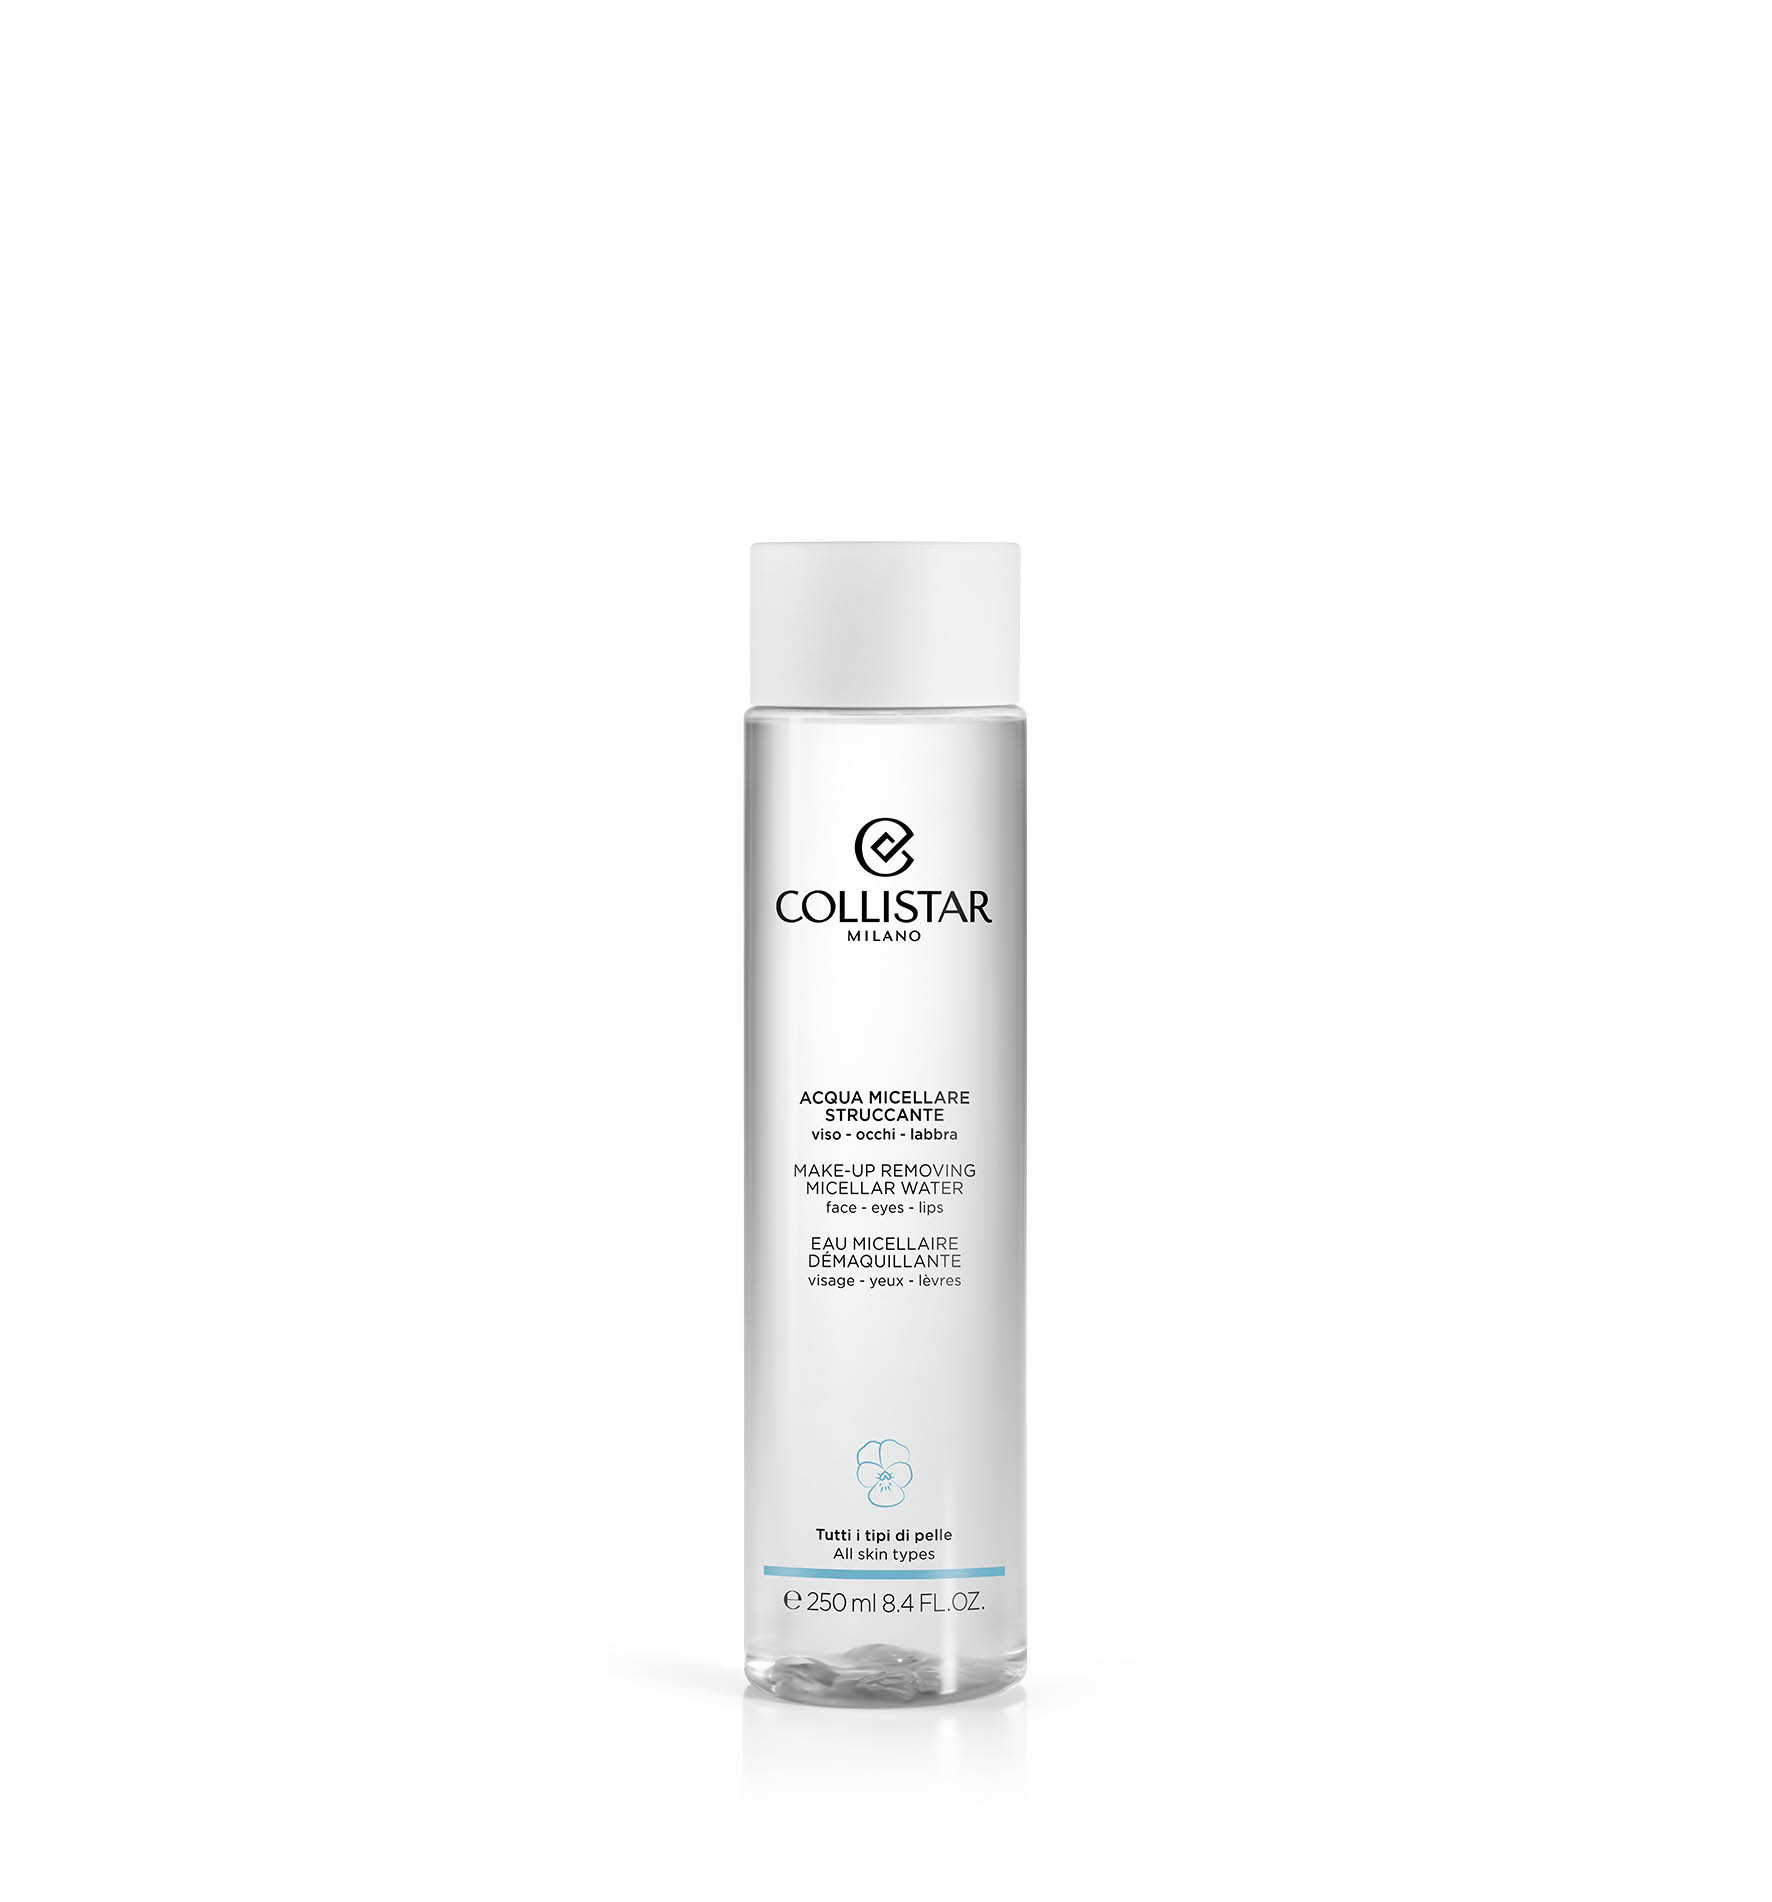 MAKE-UP REMOVING MICELLAR WATER FACE-EYES-LIPS - Dry skin | Collistar - Shop Online Ufficiale